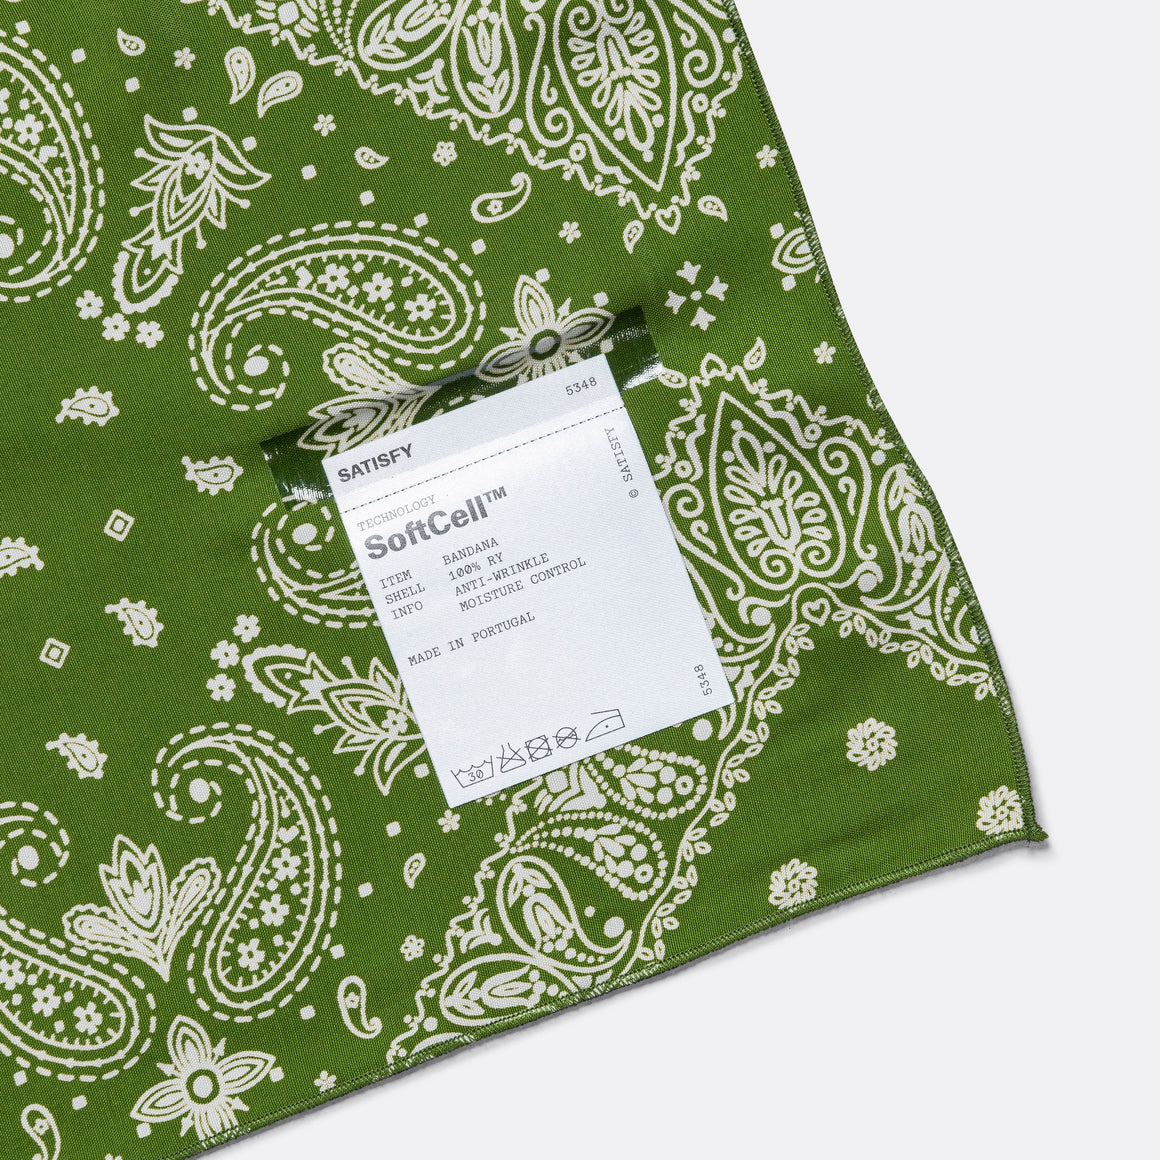 Satisfy - SoftCell™ Bandana - Green - Up There Athletics